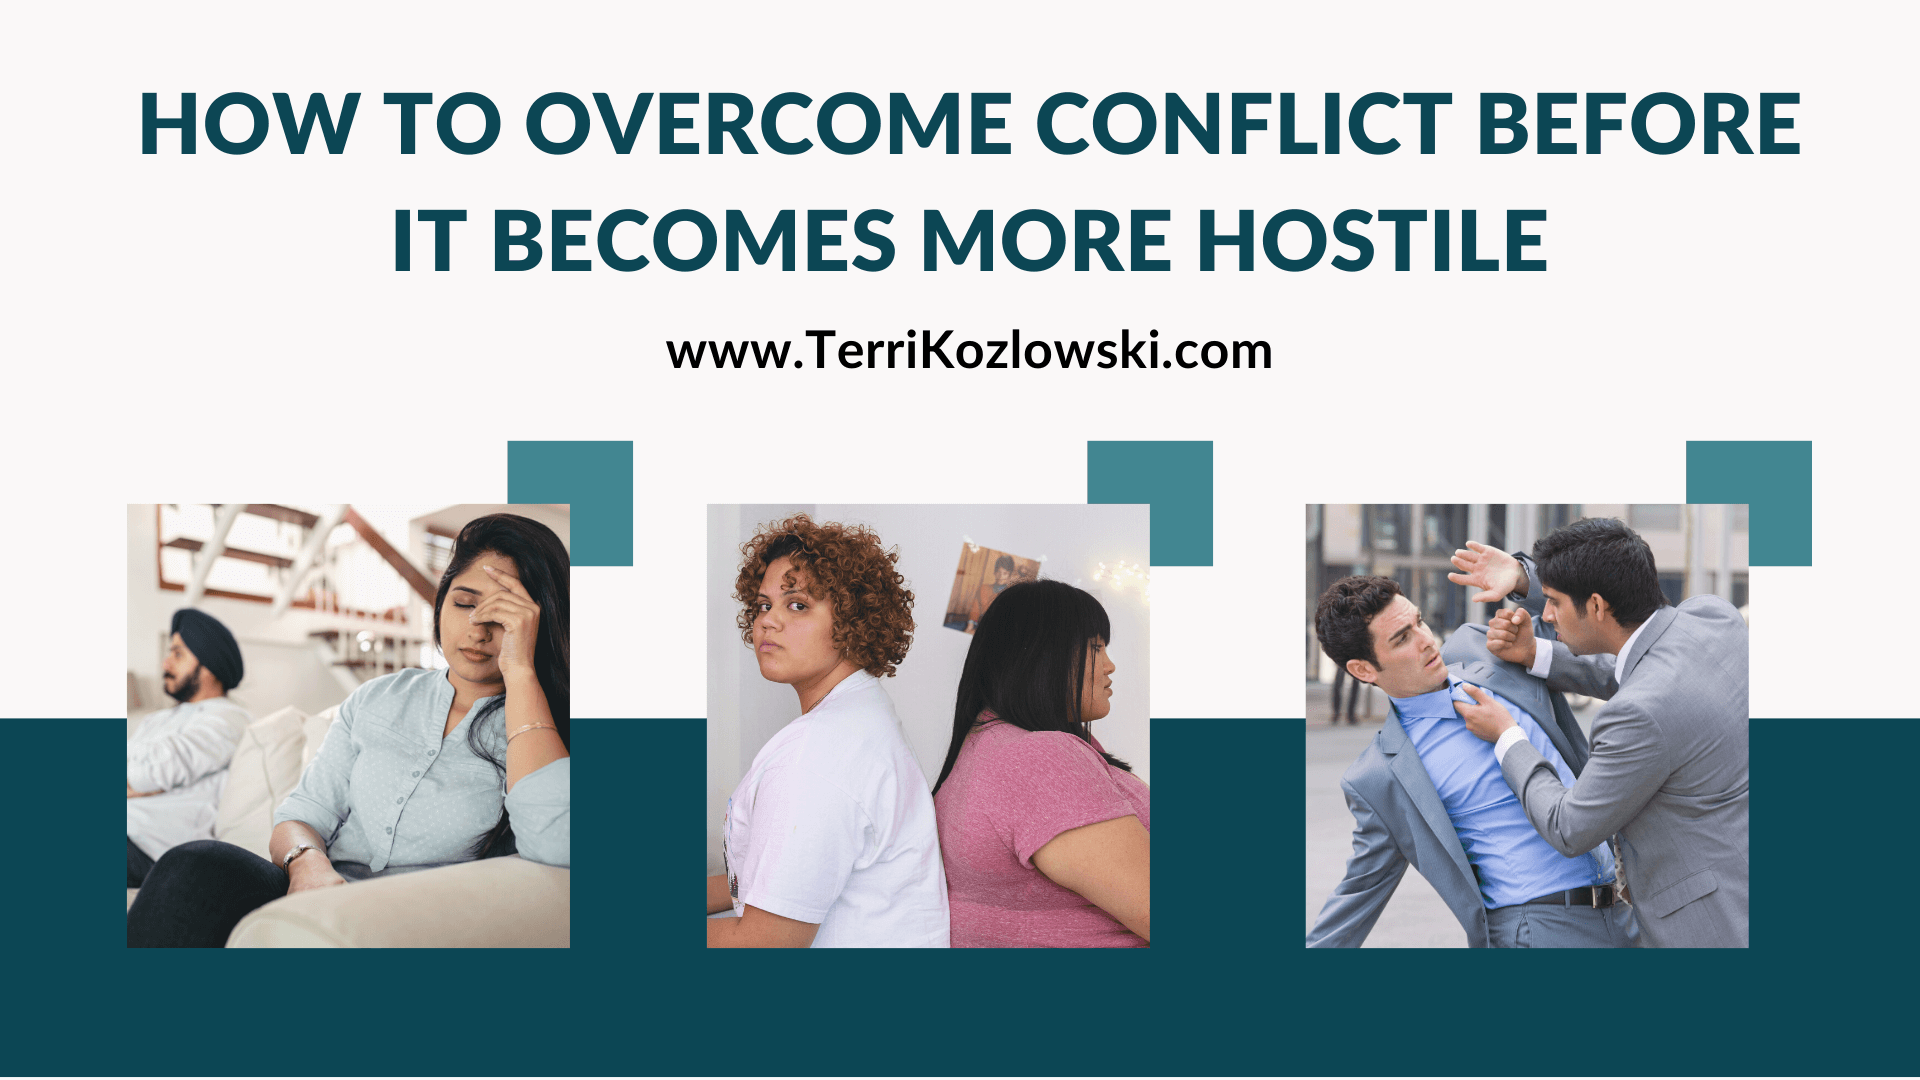 How To Overcome Conflict Before It Becomes More Hostile